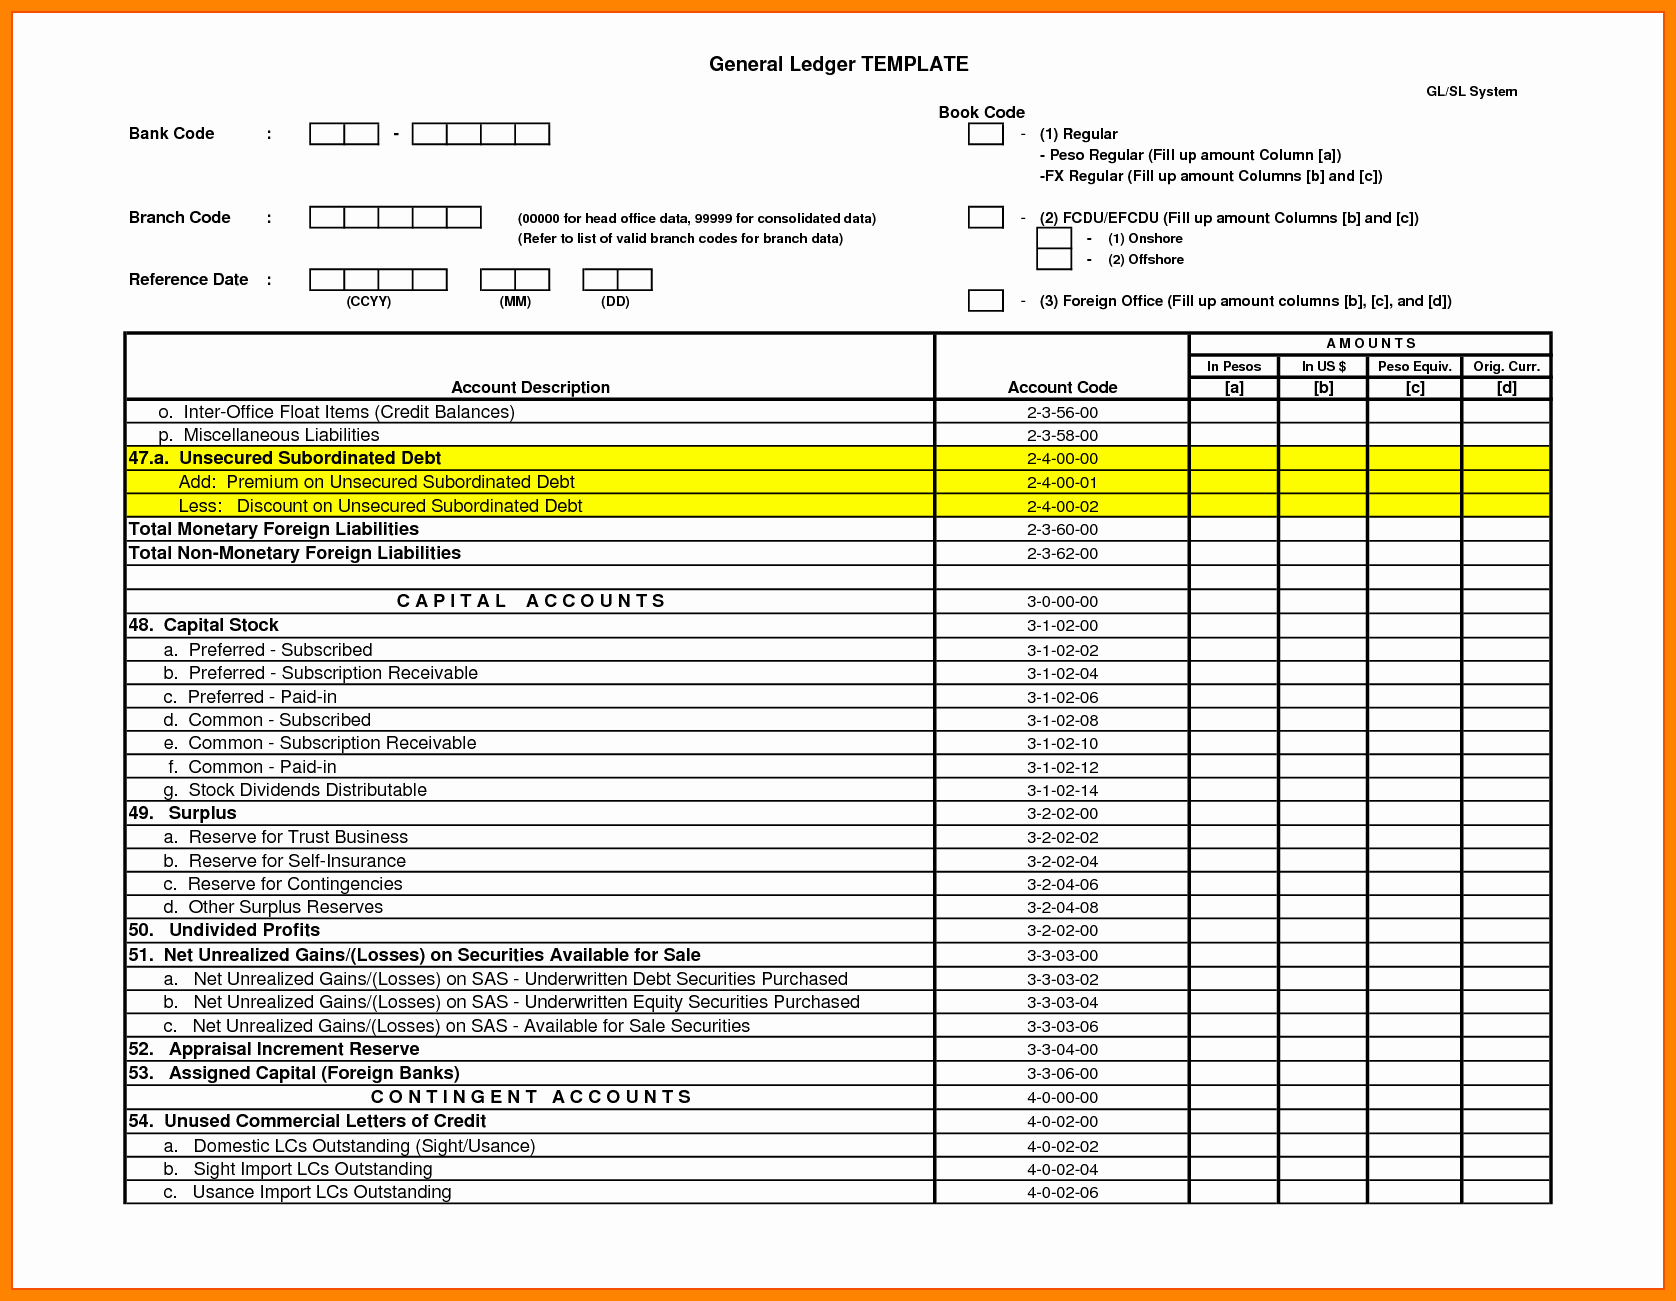 Free Small Business Ledger Template Best Of 11 General Ledger Template for Small Business